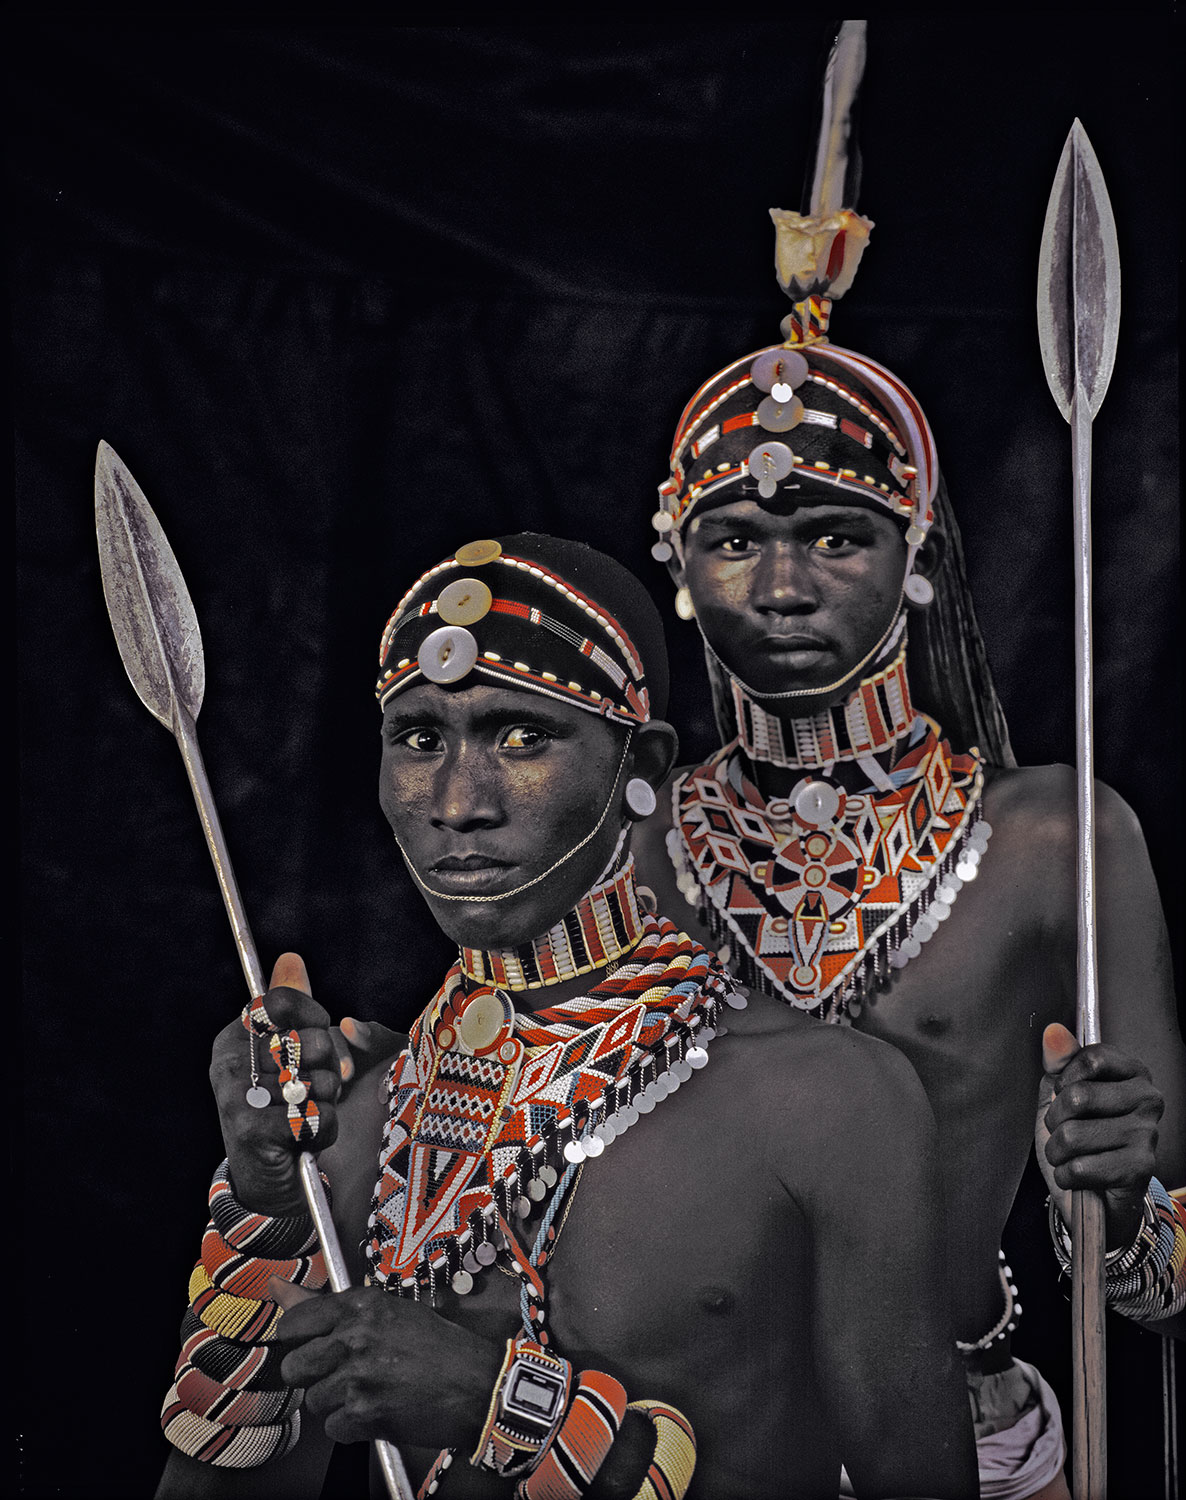 63 Photos of some of the Worlds Most Remote Tribes.